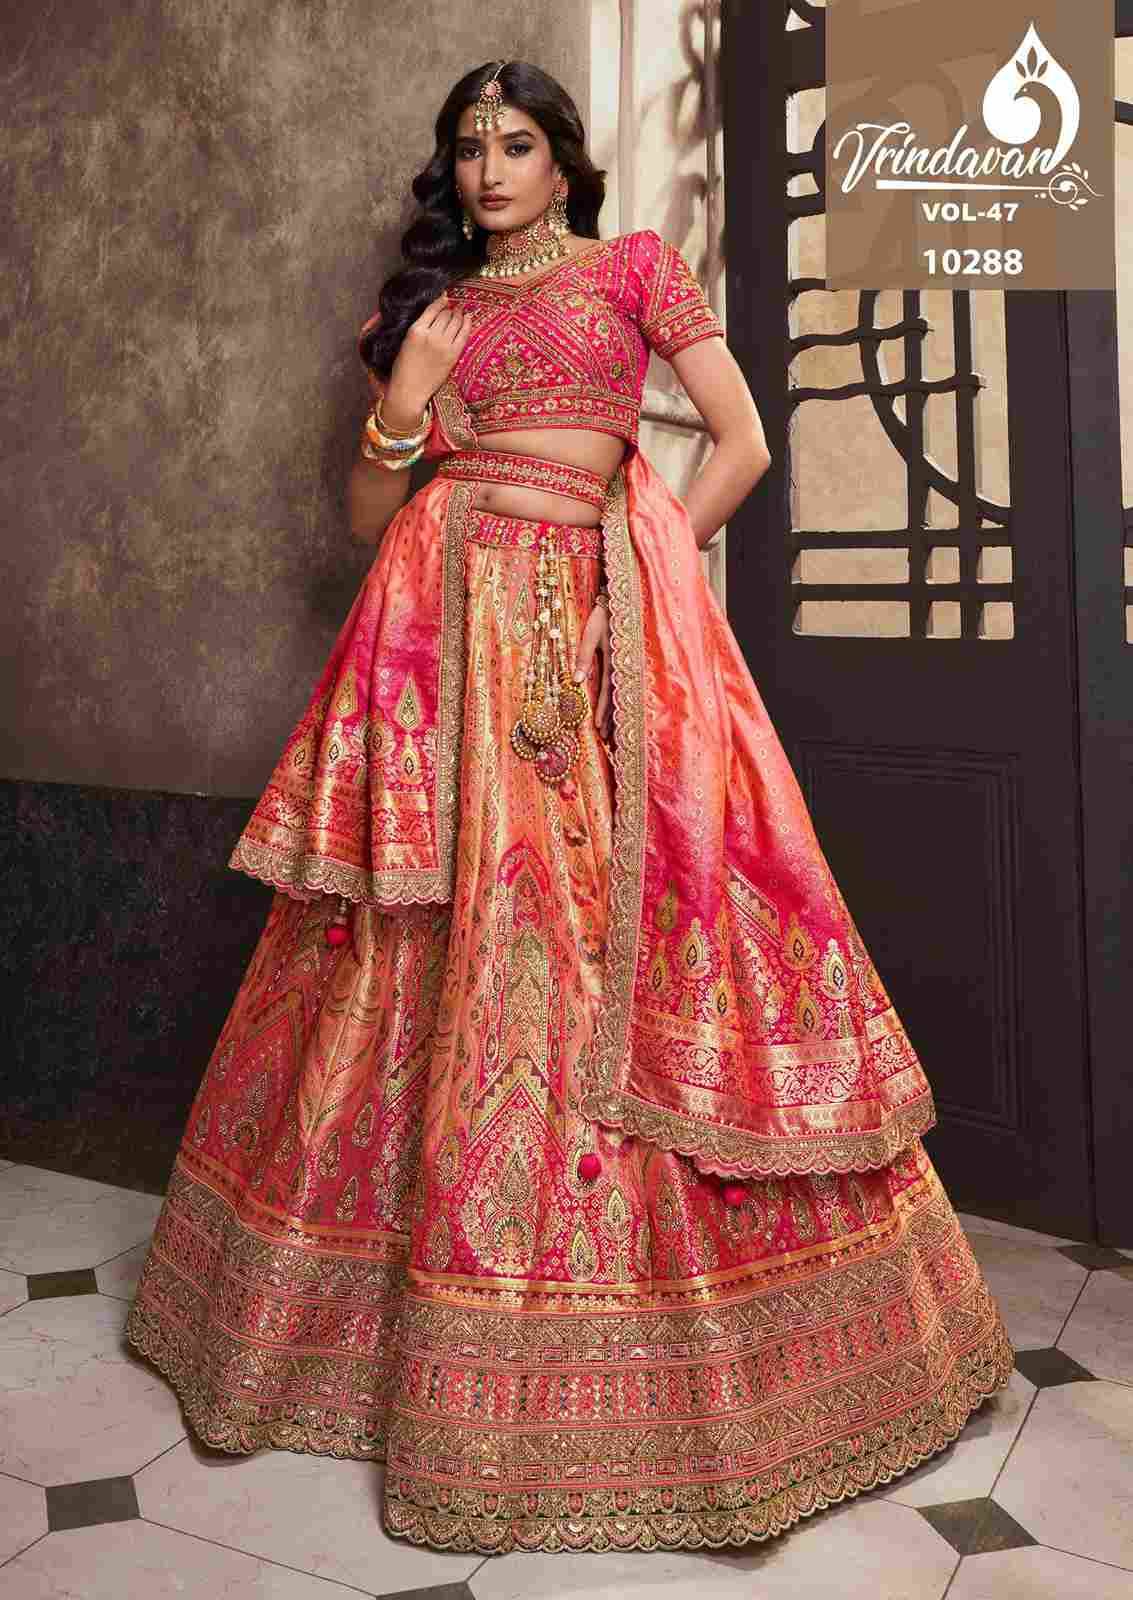 Vrindavan Vol-47 By Vrindavan 10281 To 10289 Series Designer Beautiful Wedding Collection Occasional Wear & Party Wear Silk Lehengas At Wholesale Price